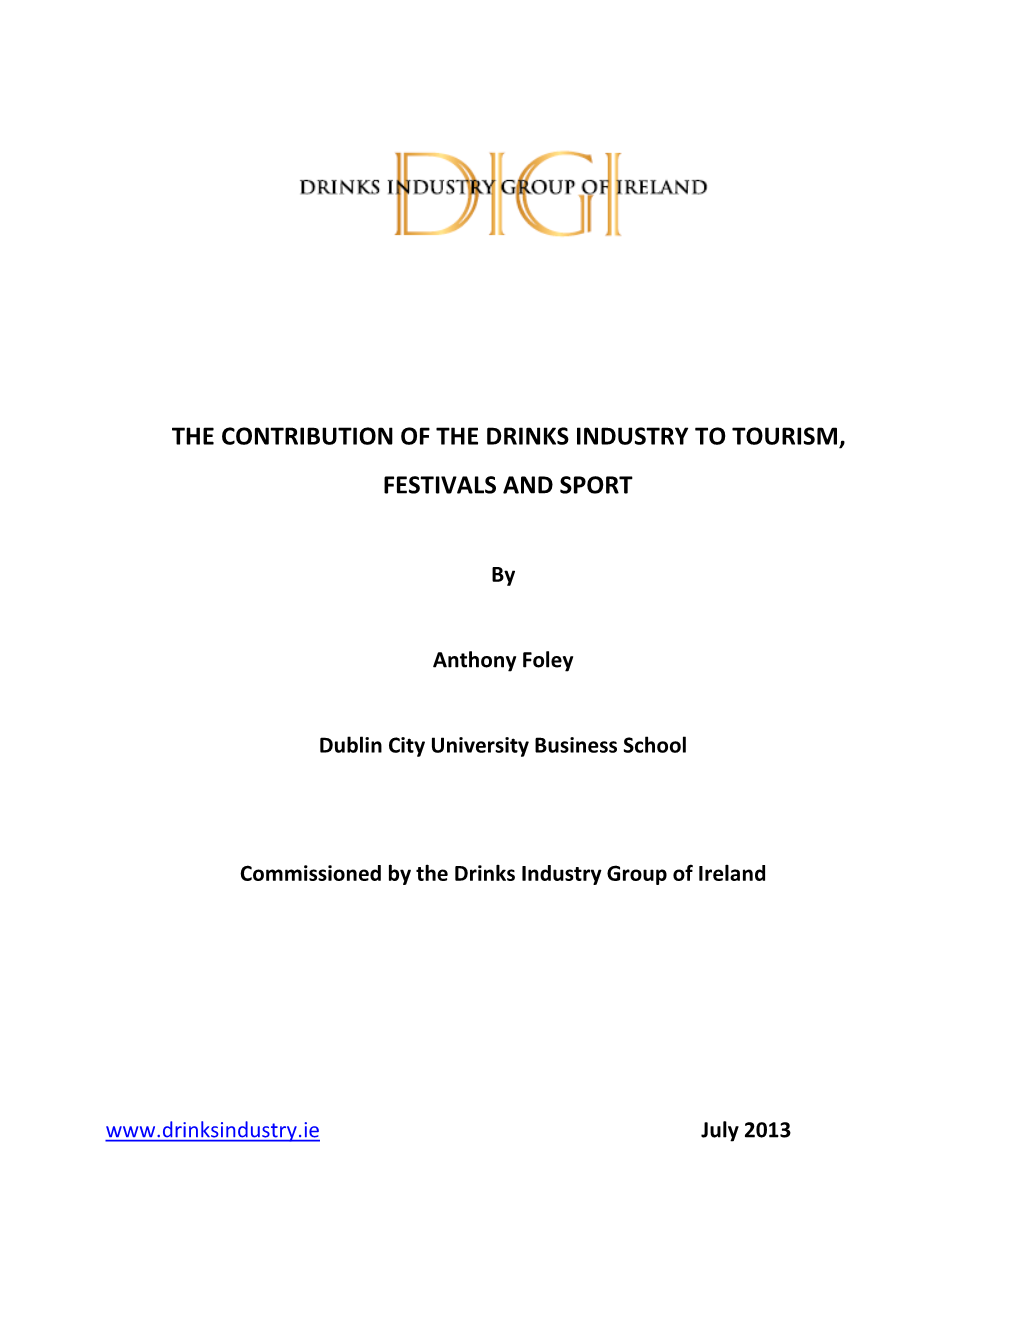 The Contribution of the Drinks Industry to Tourism, Festivals and Sport